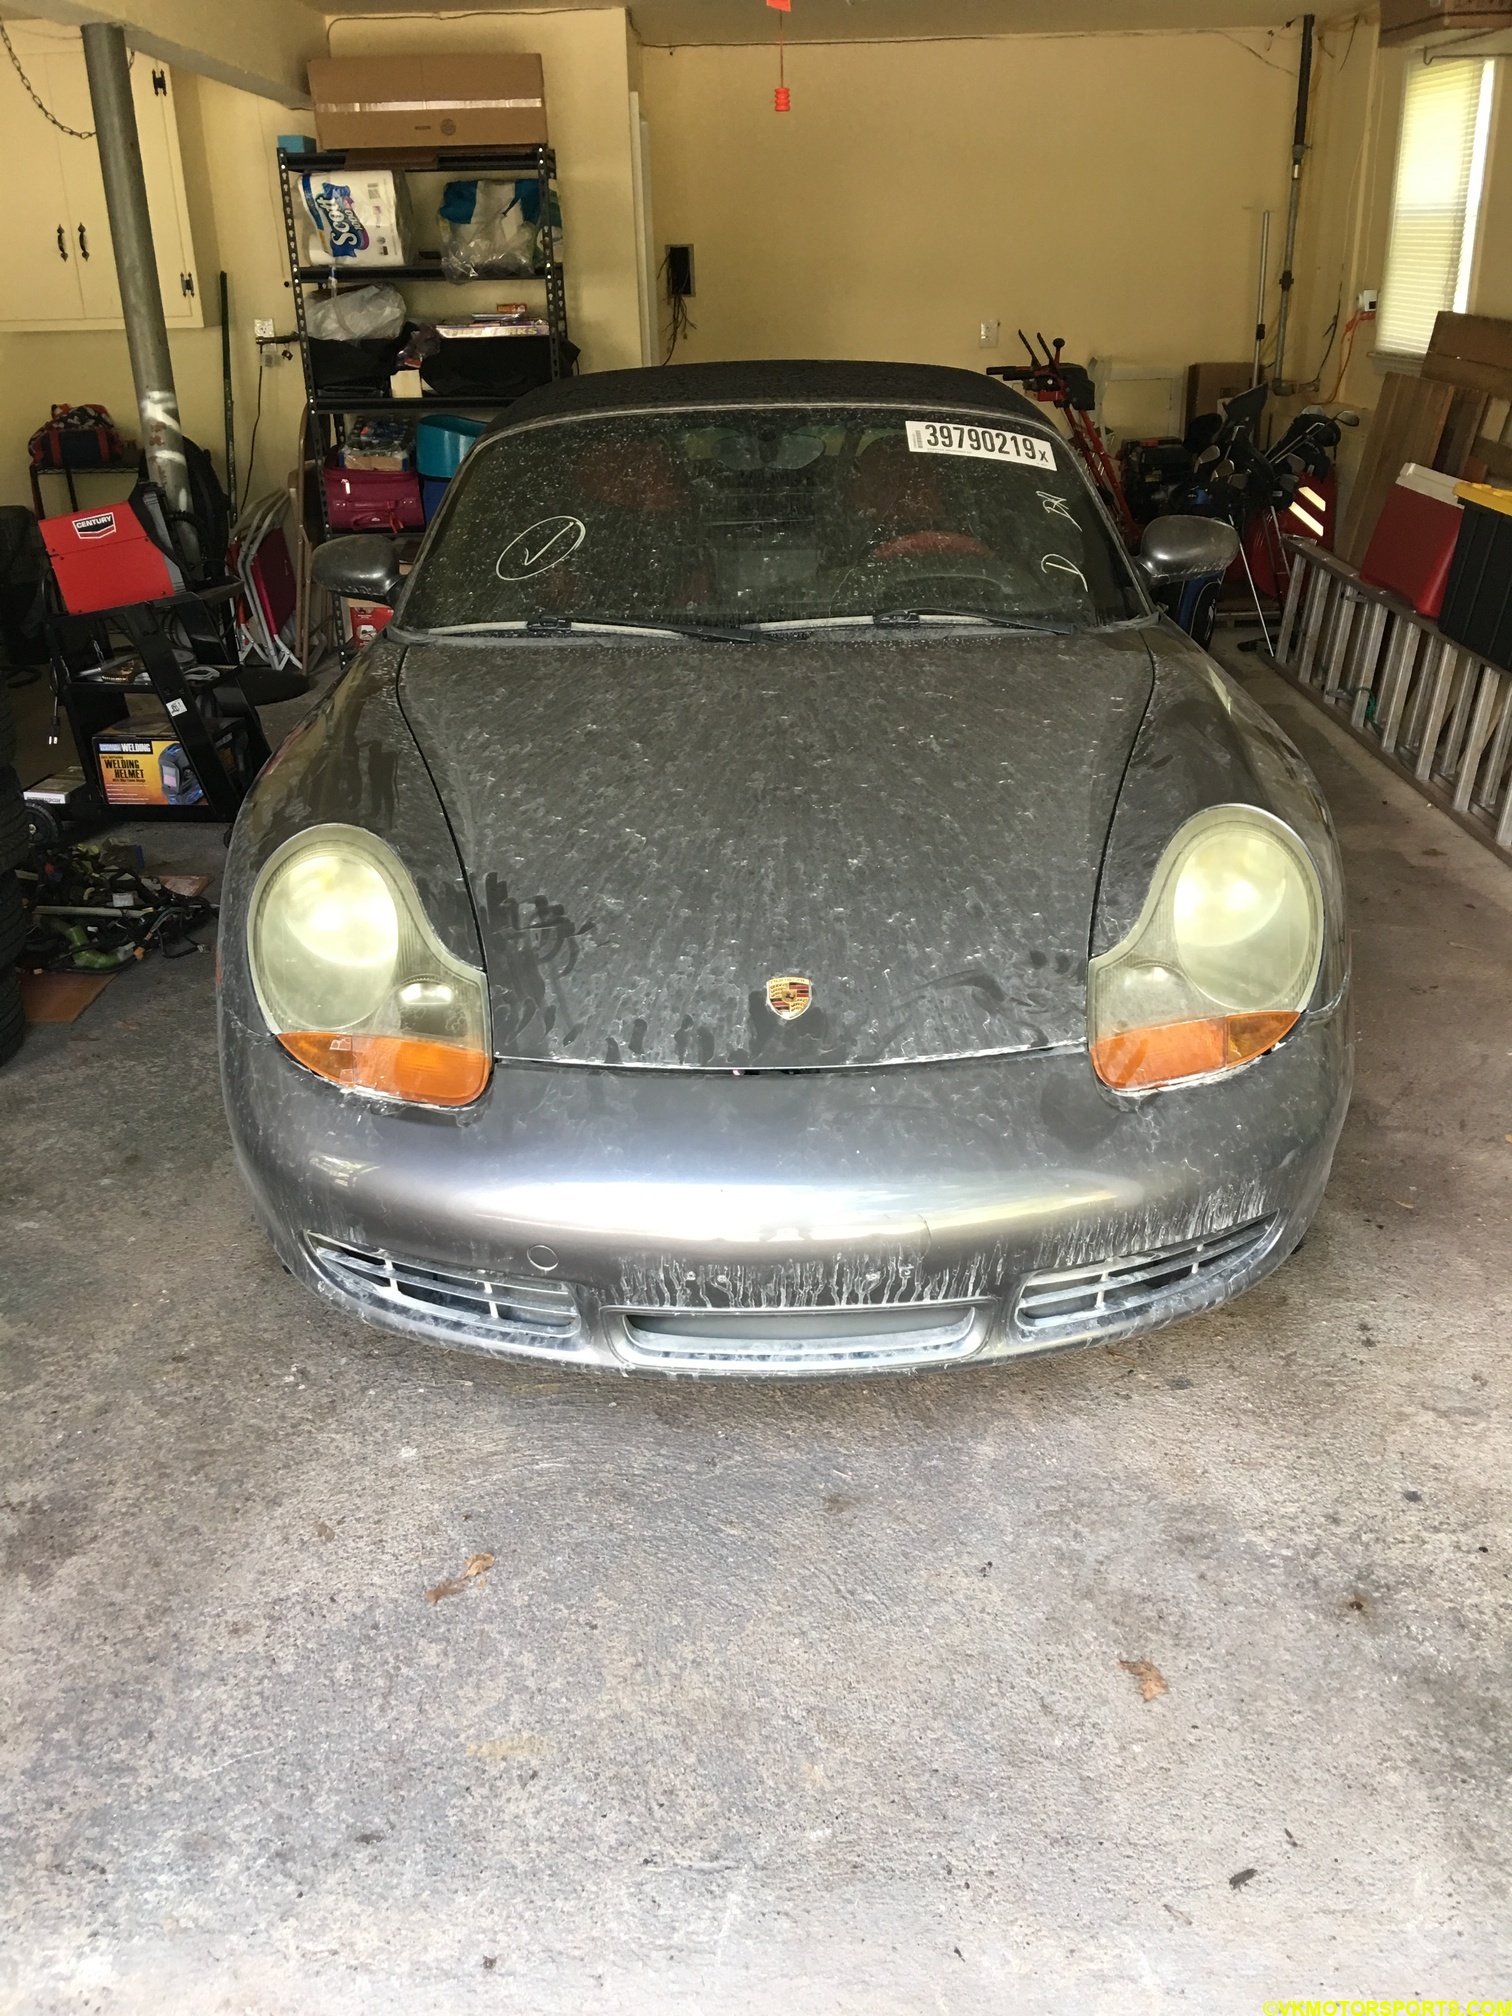 Figure 12. Boxster pushed into the garage